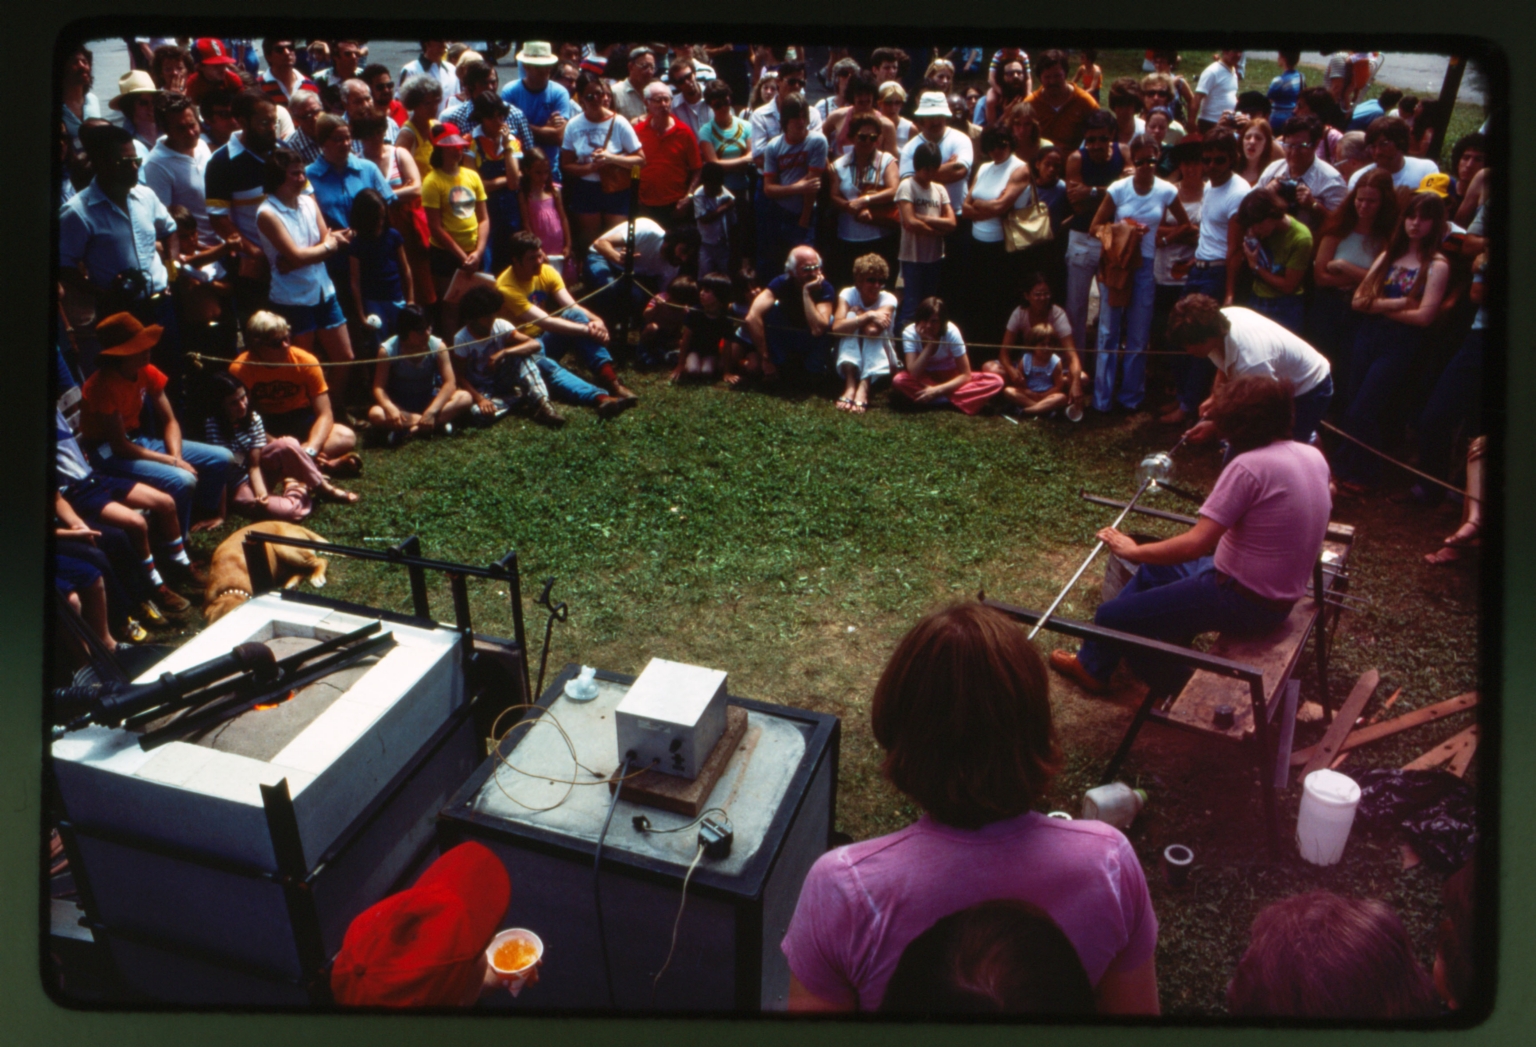 Mobile glass blowing demonstration